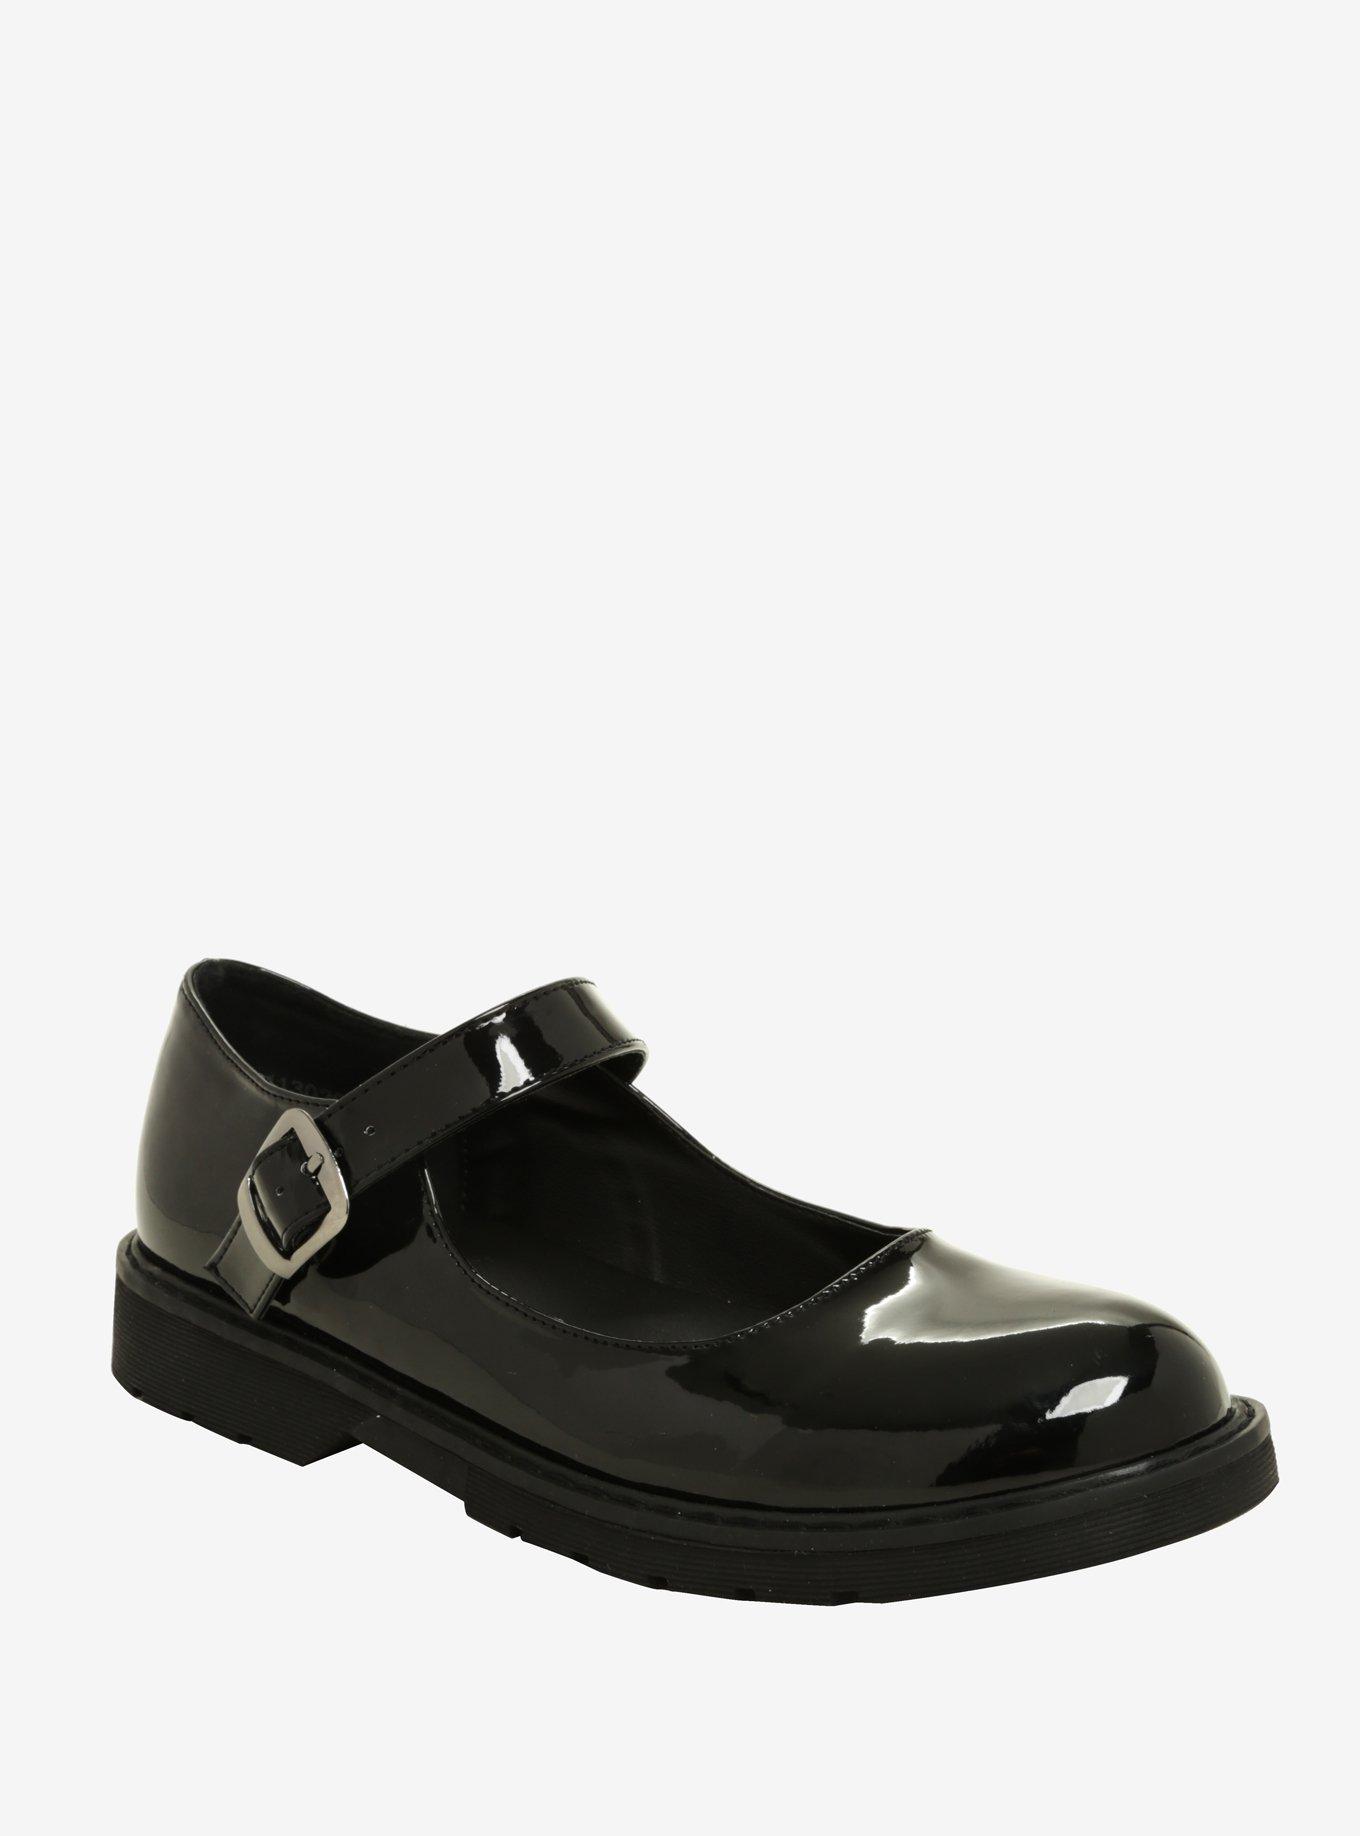 Black Patent Faux Leather Mary Janes, BLACK, hi-res